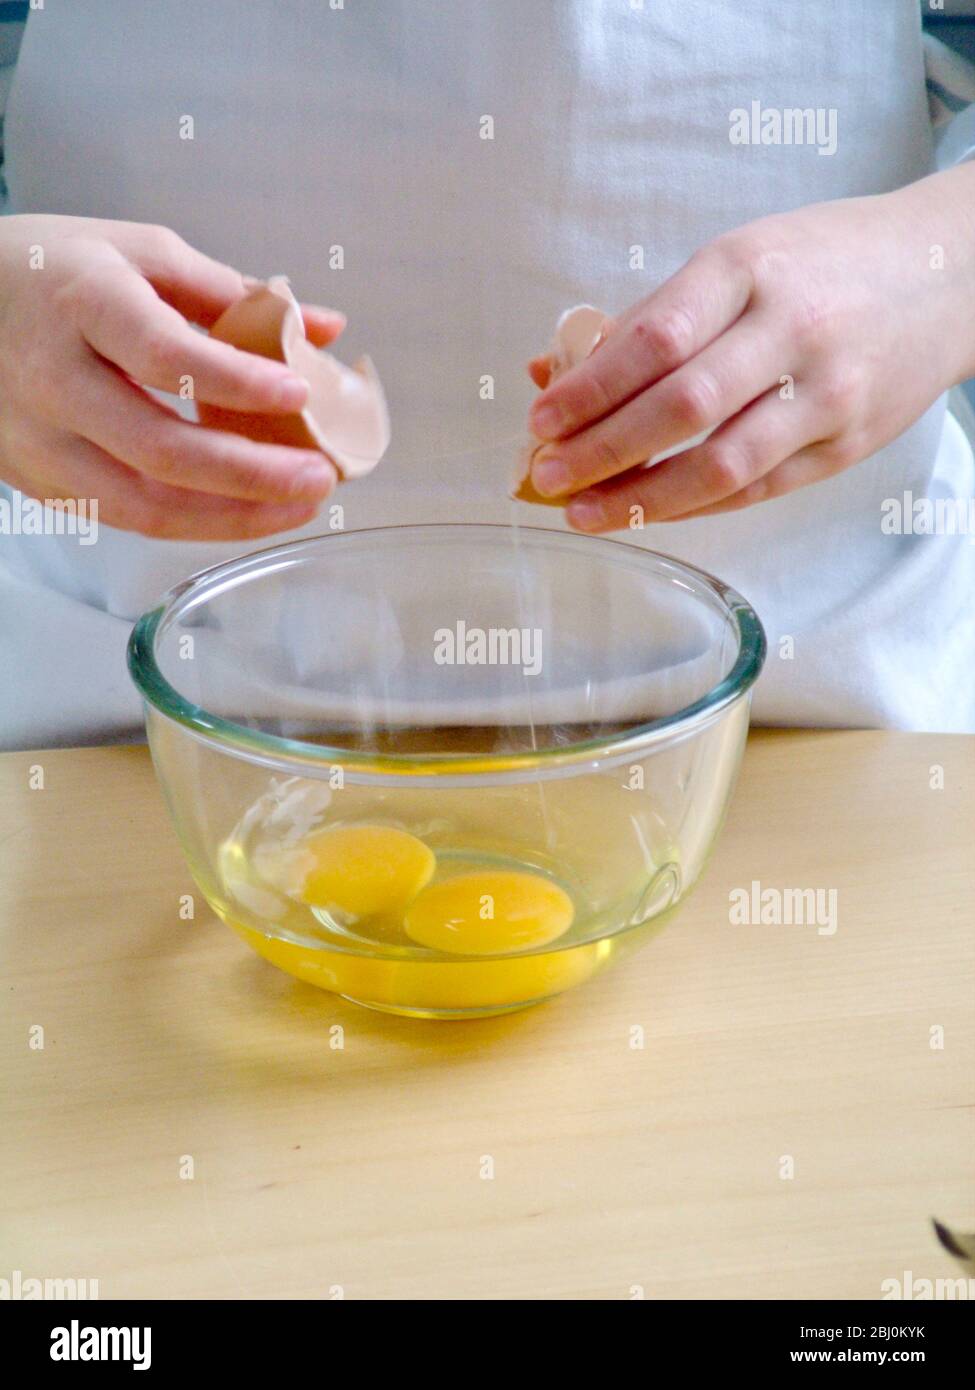 Child breaking eggs into glass bowl, learning how to make scrambled eggs. - Stock Photo